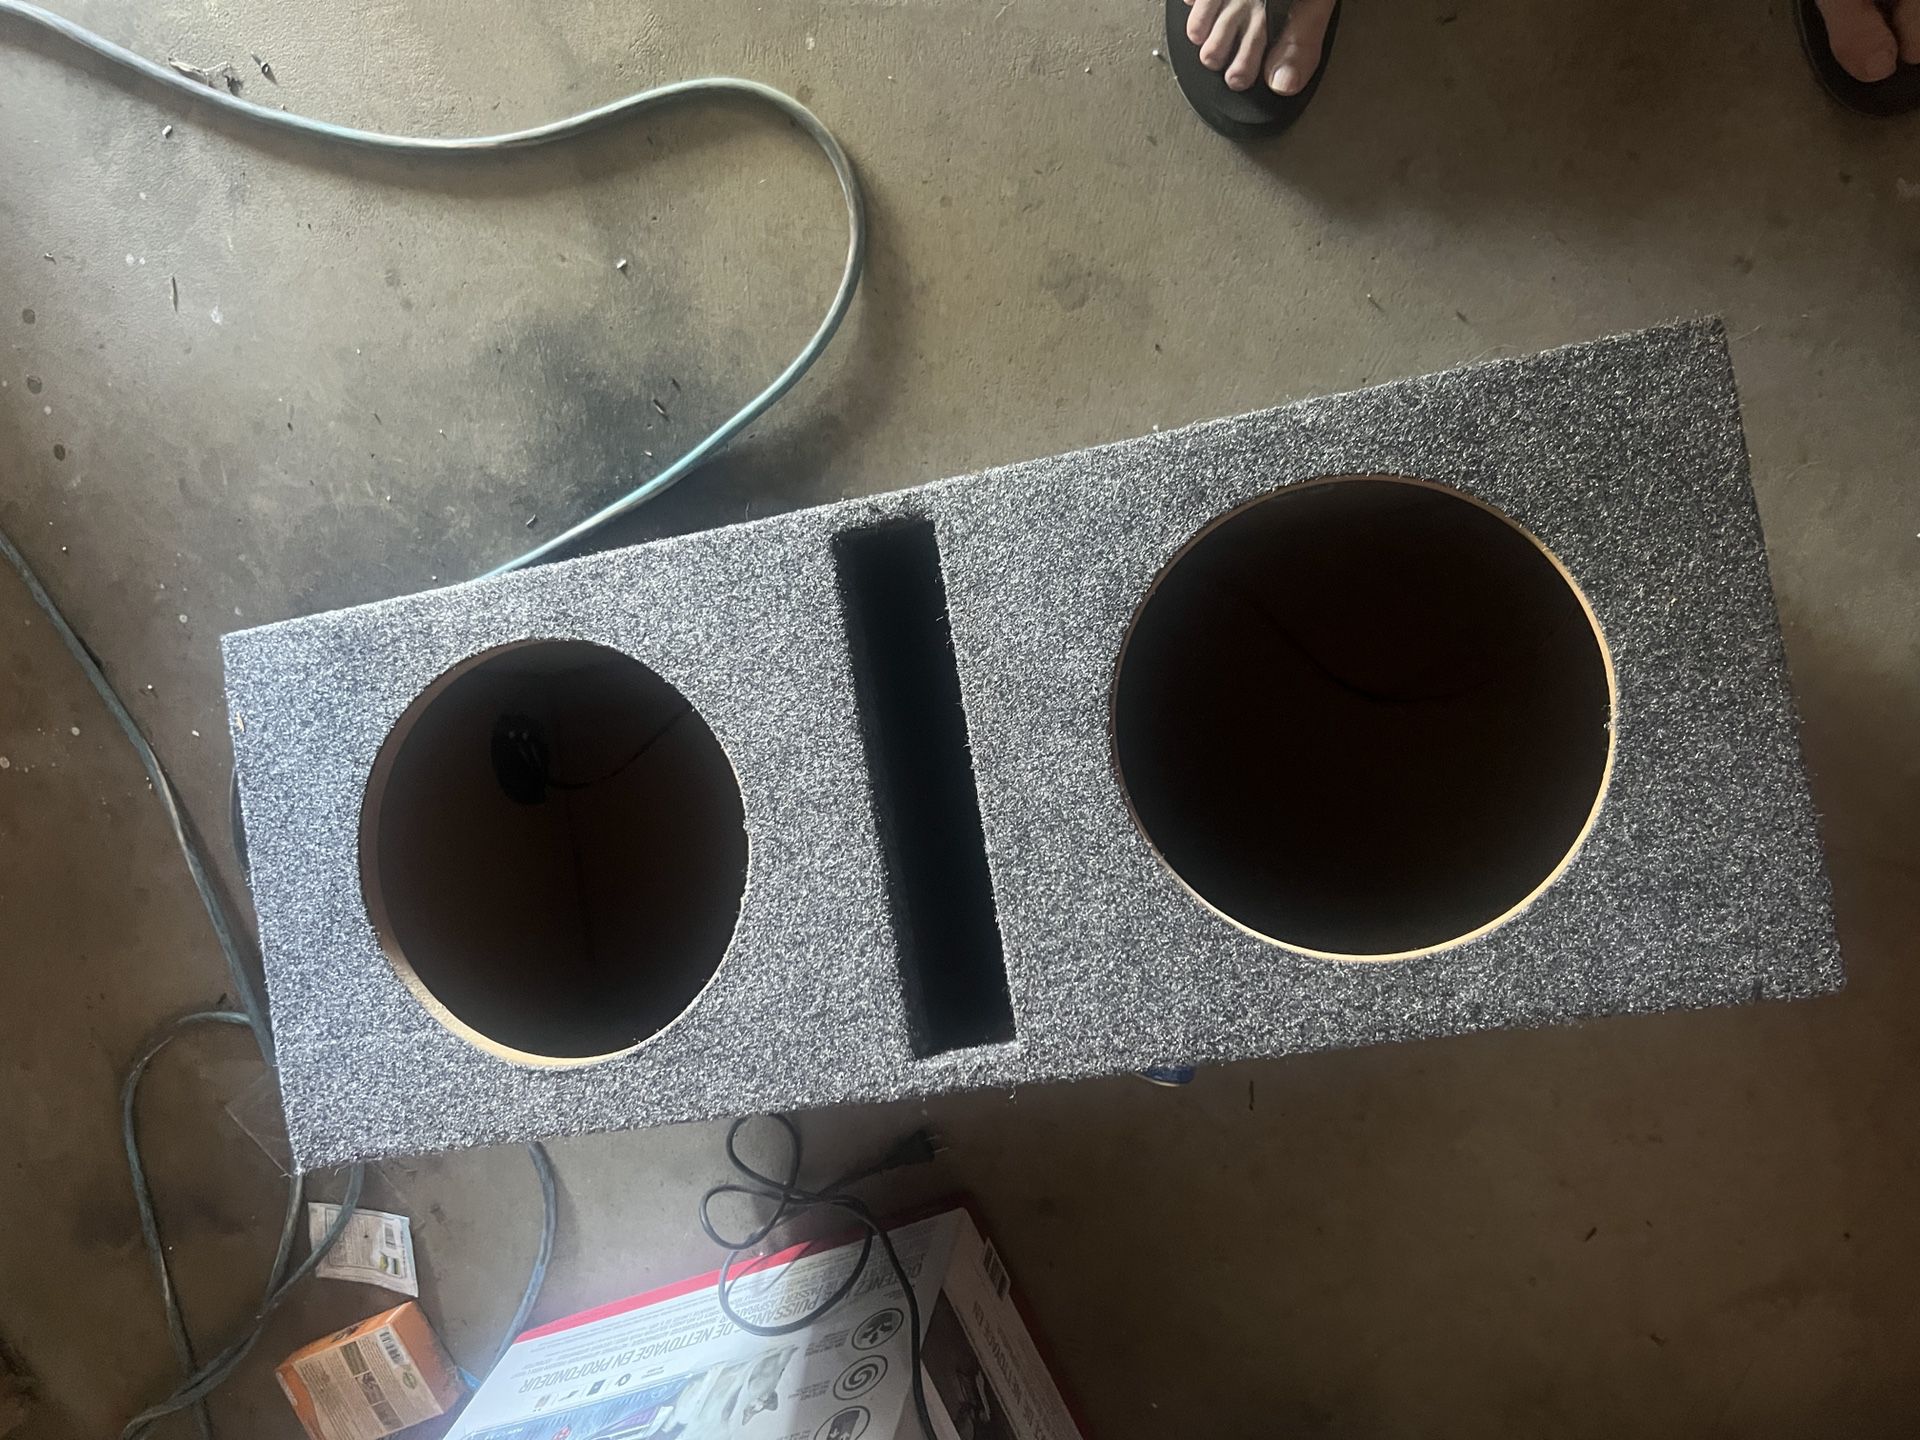 Ported Subwoofer Box For 2 10”